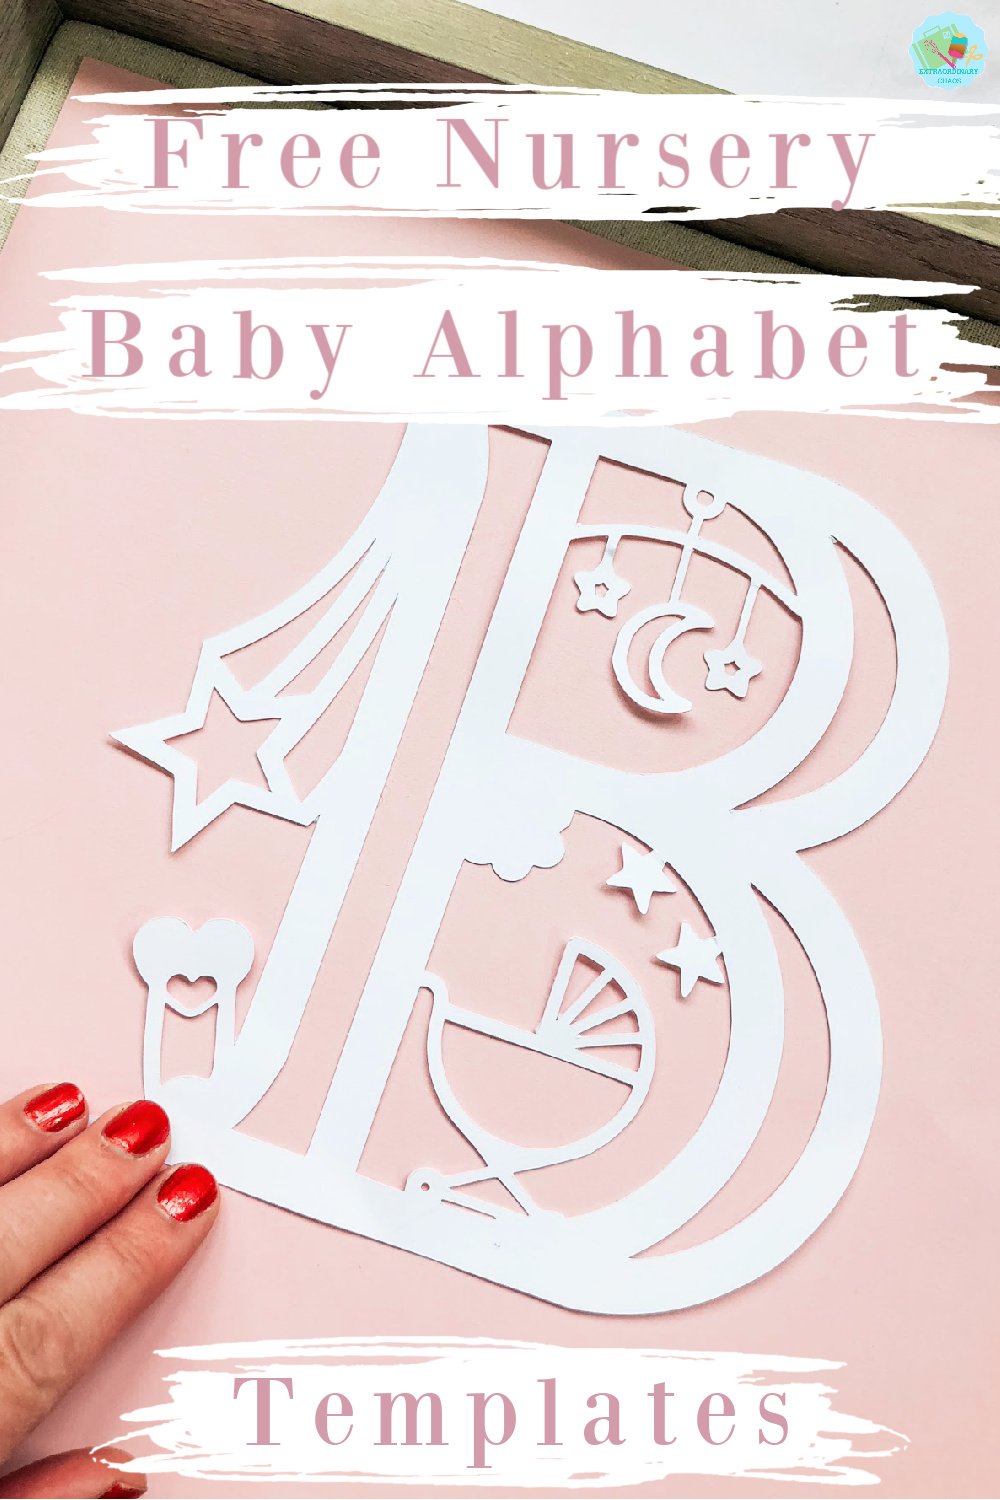 Free Cricut  Nursery Baby Alphabet Templates to make as gifts or Christmas home projects and to sell